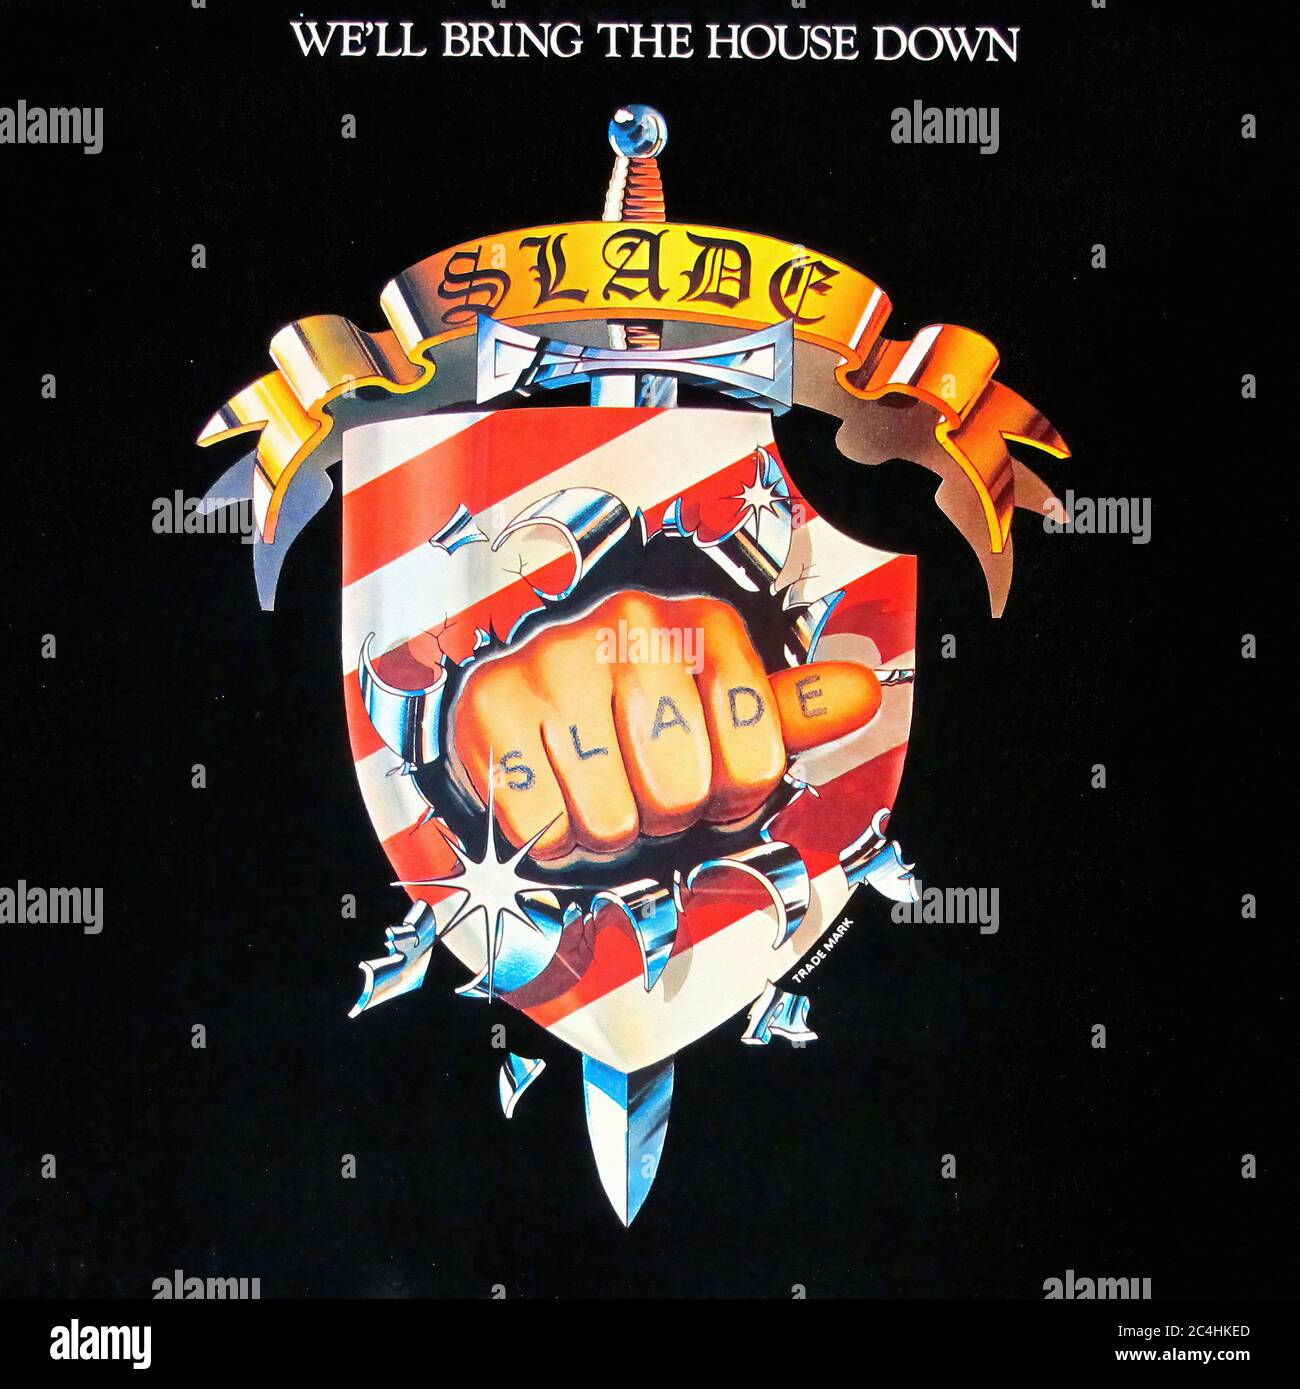 Slade We'LL Bring the House down 12'' Lp Vinyl - Vintage Record Cover Stock Photo